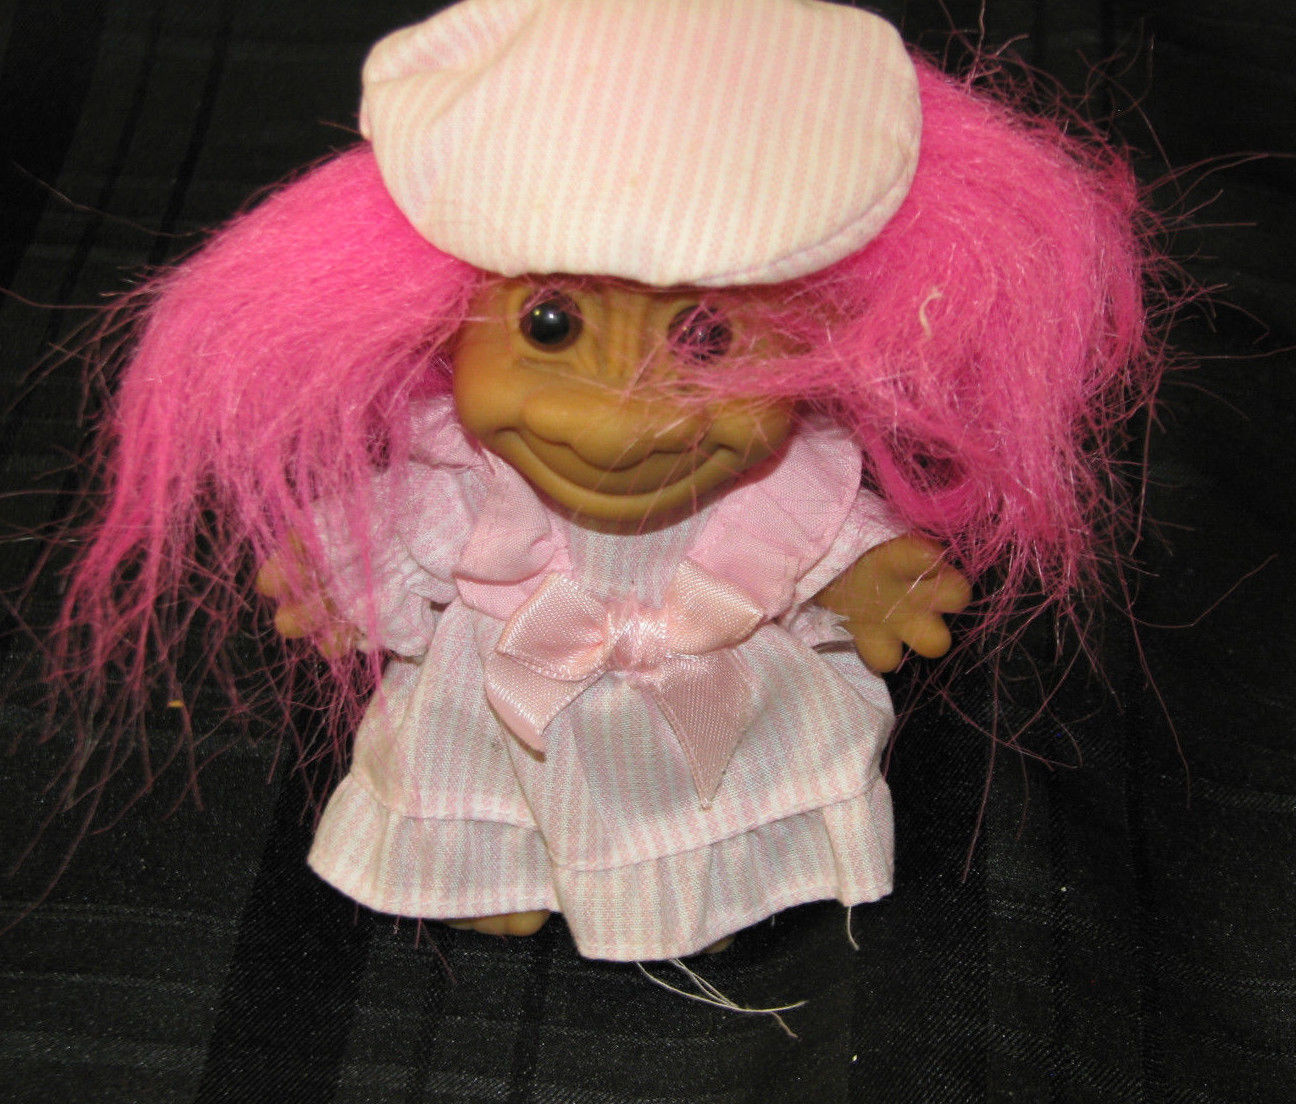 Primary image for Russ 5" Troll Doll- Pink Striped Dress and Cap, BRIGHT HOT Pink Hair